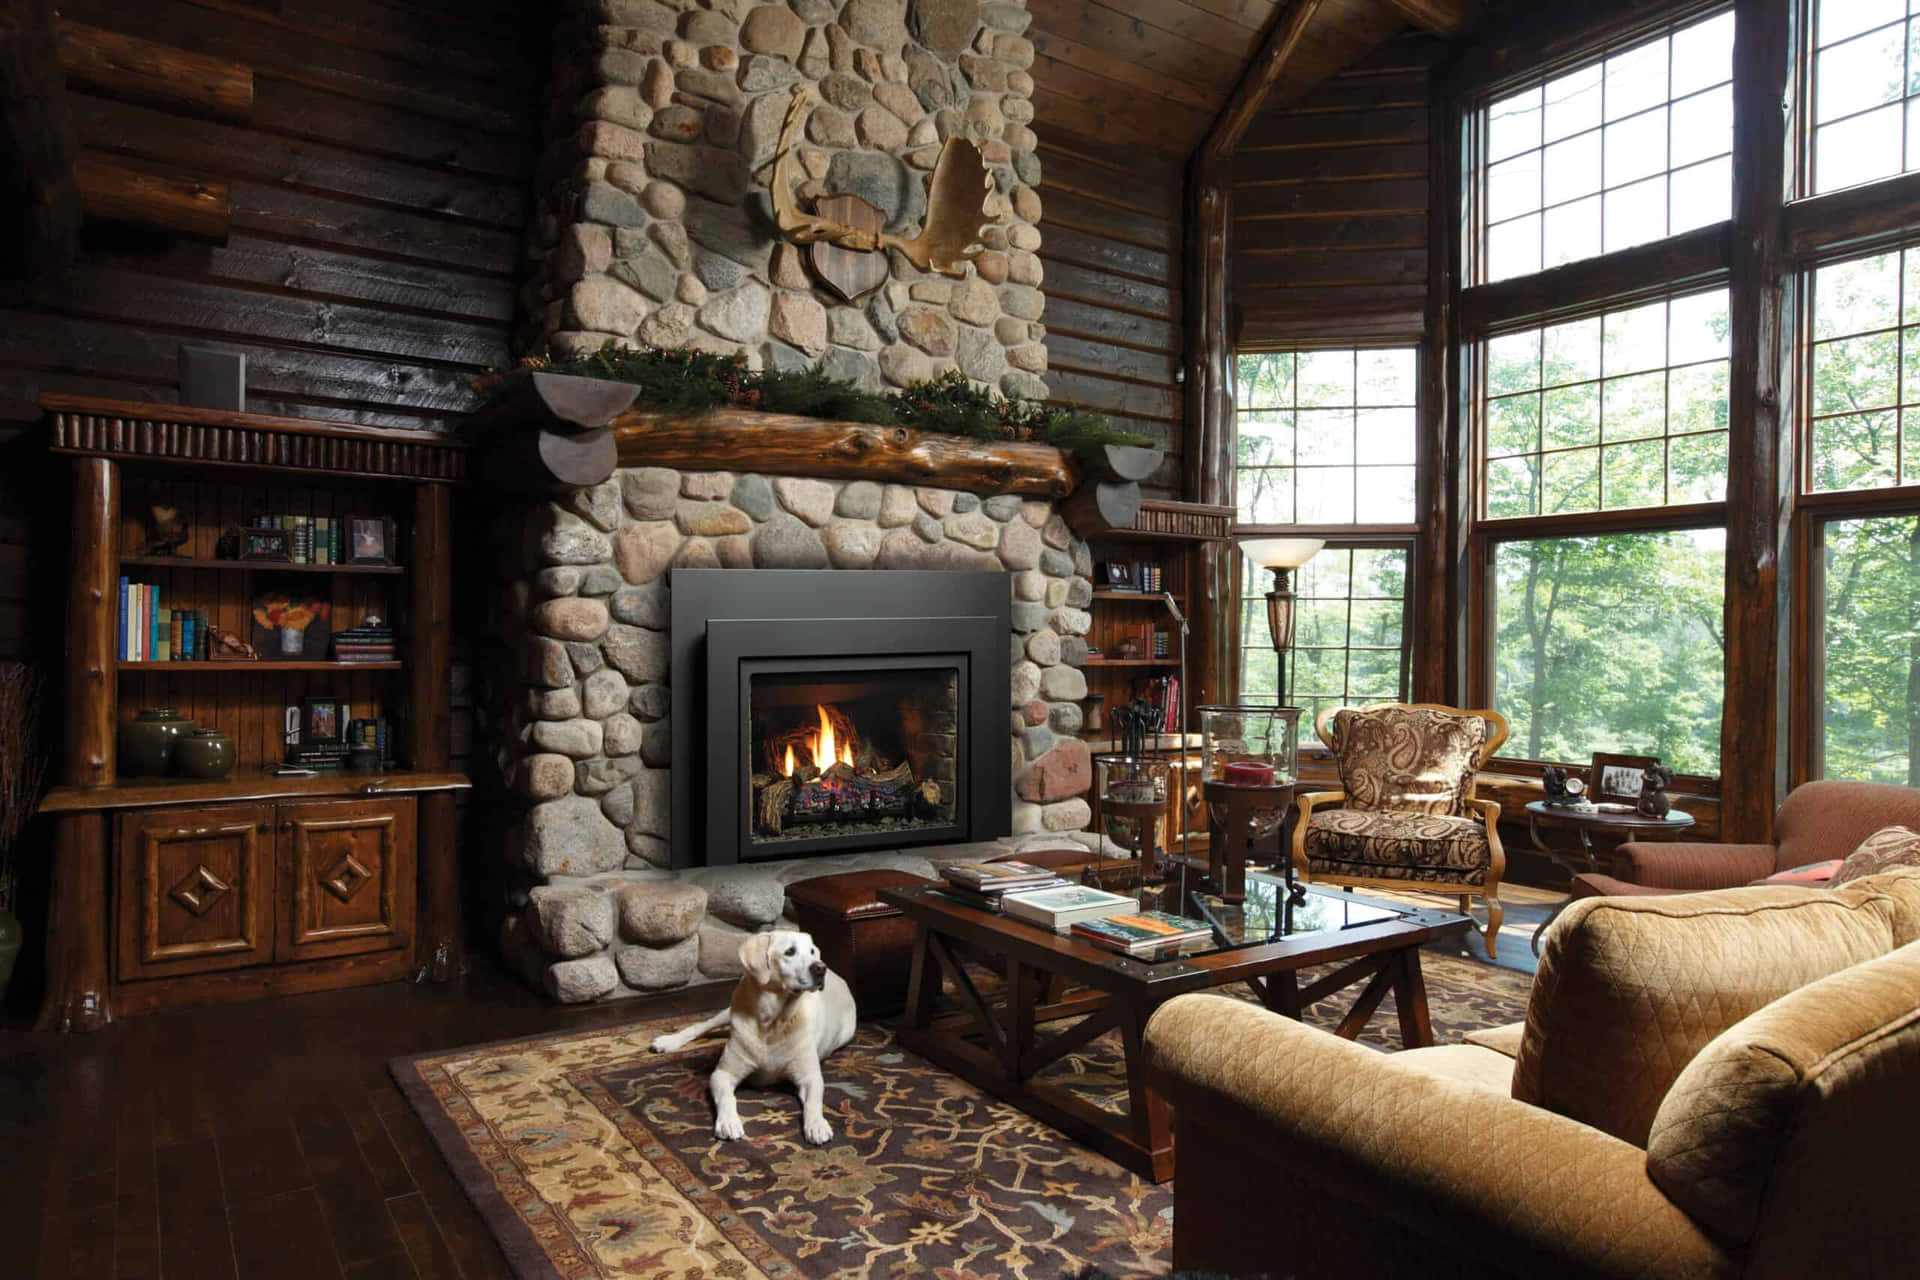 Enjoy the Cozy Warmth of a Fireplace